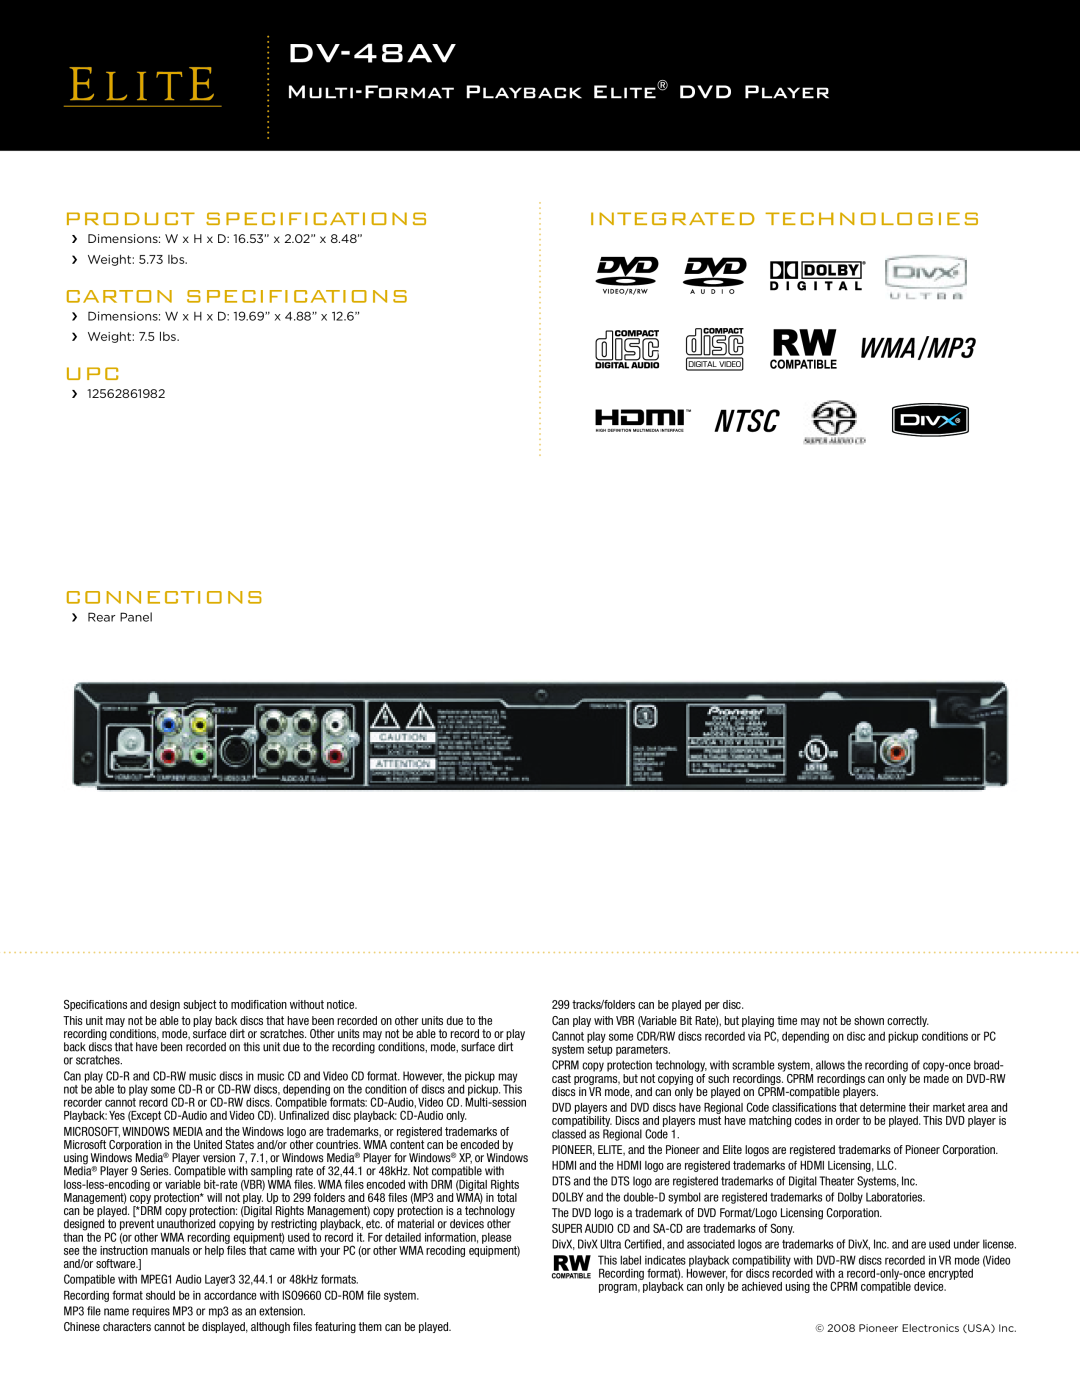 Elite DV-48AV manual Product Specifications, Carton Specifications, Integrated Technologies, Connections 